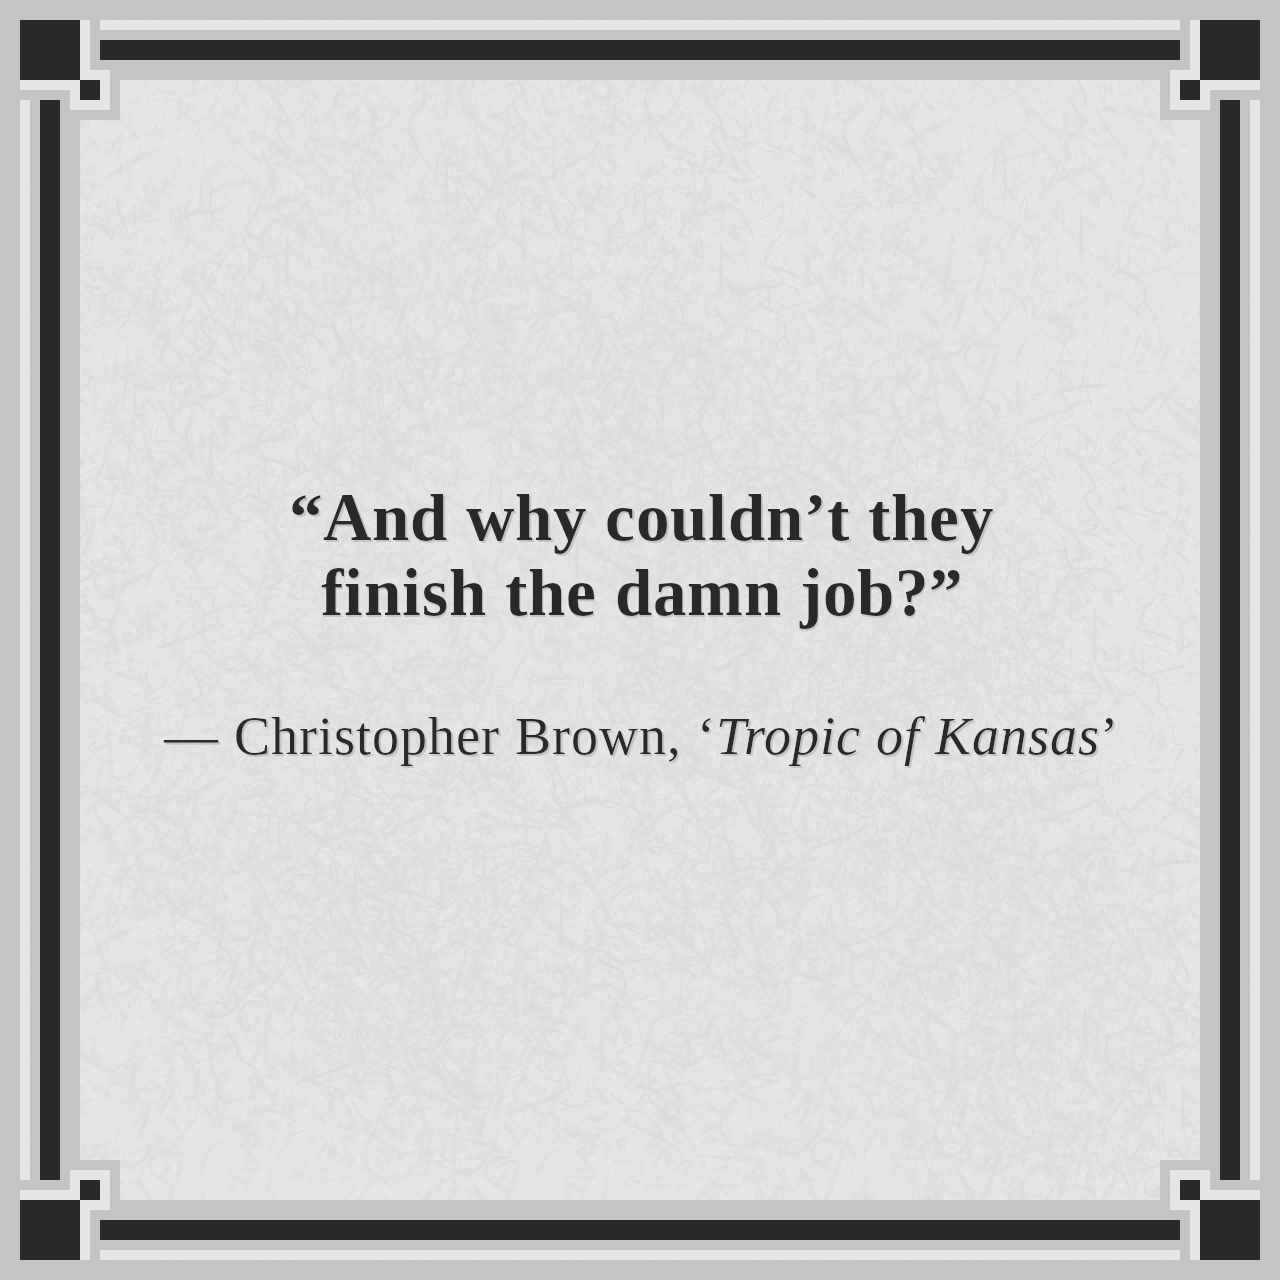 “And why couldn’t they finish the damn job?”

— Christopher Brown, ‘Tropic of Kansas’